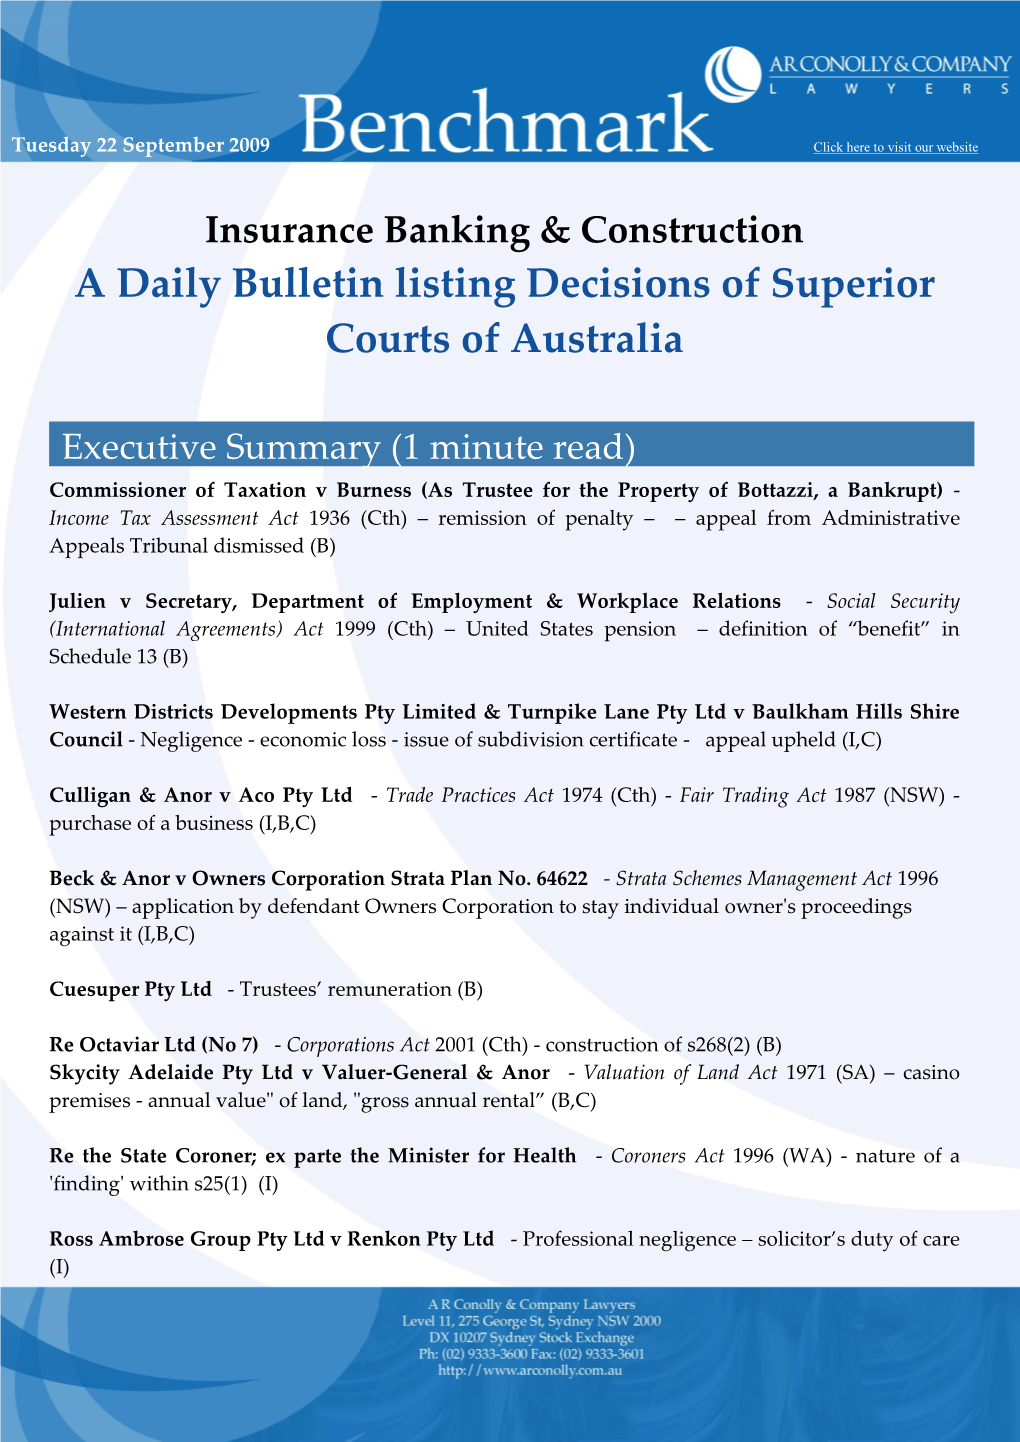 A Daily Bulletin Listing Decisions of Superior Courts of Australia